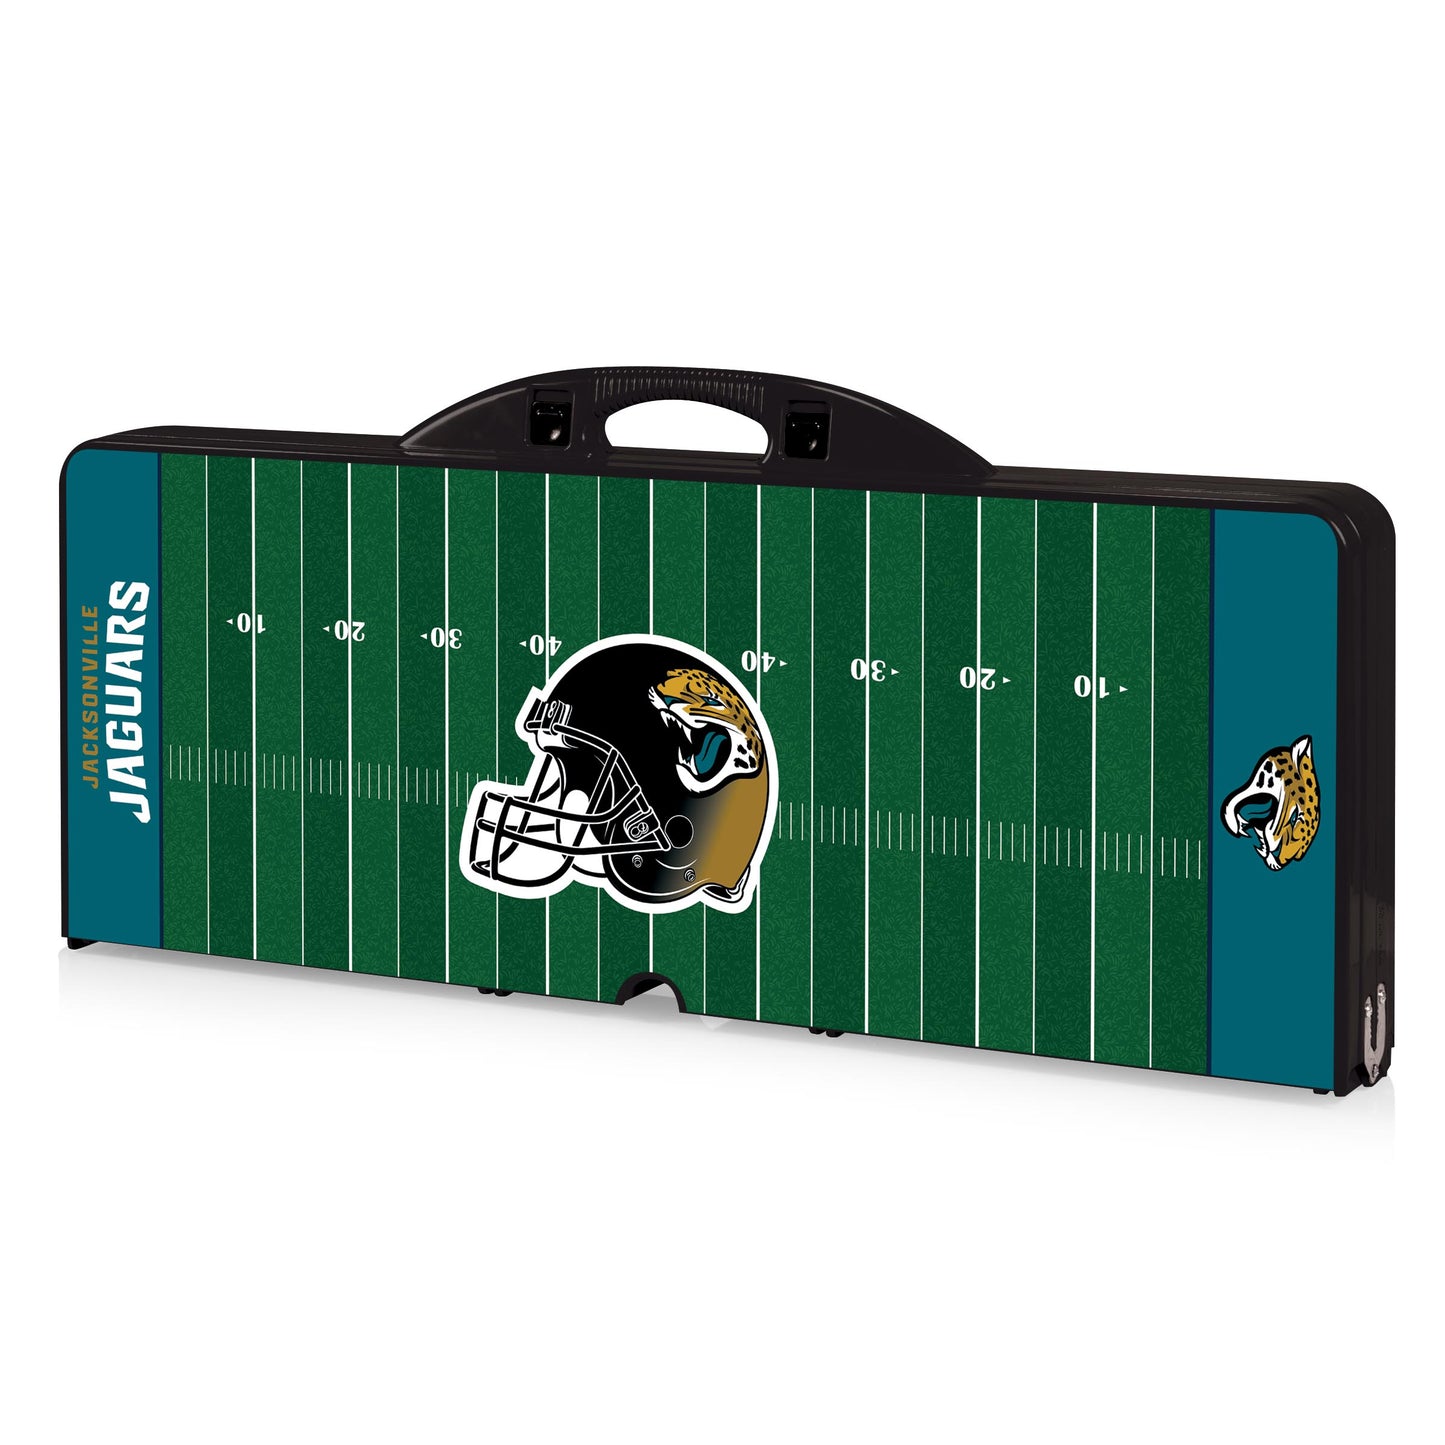 Jacksonville Jaguars - Picnic Table Portable Folding Table with Seats and Umbrella